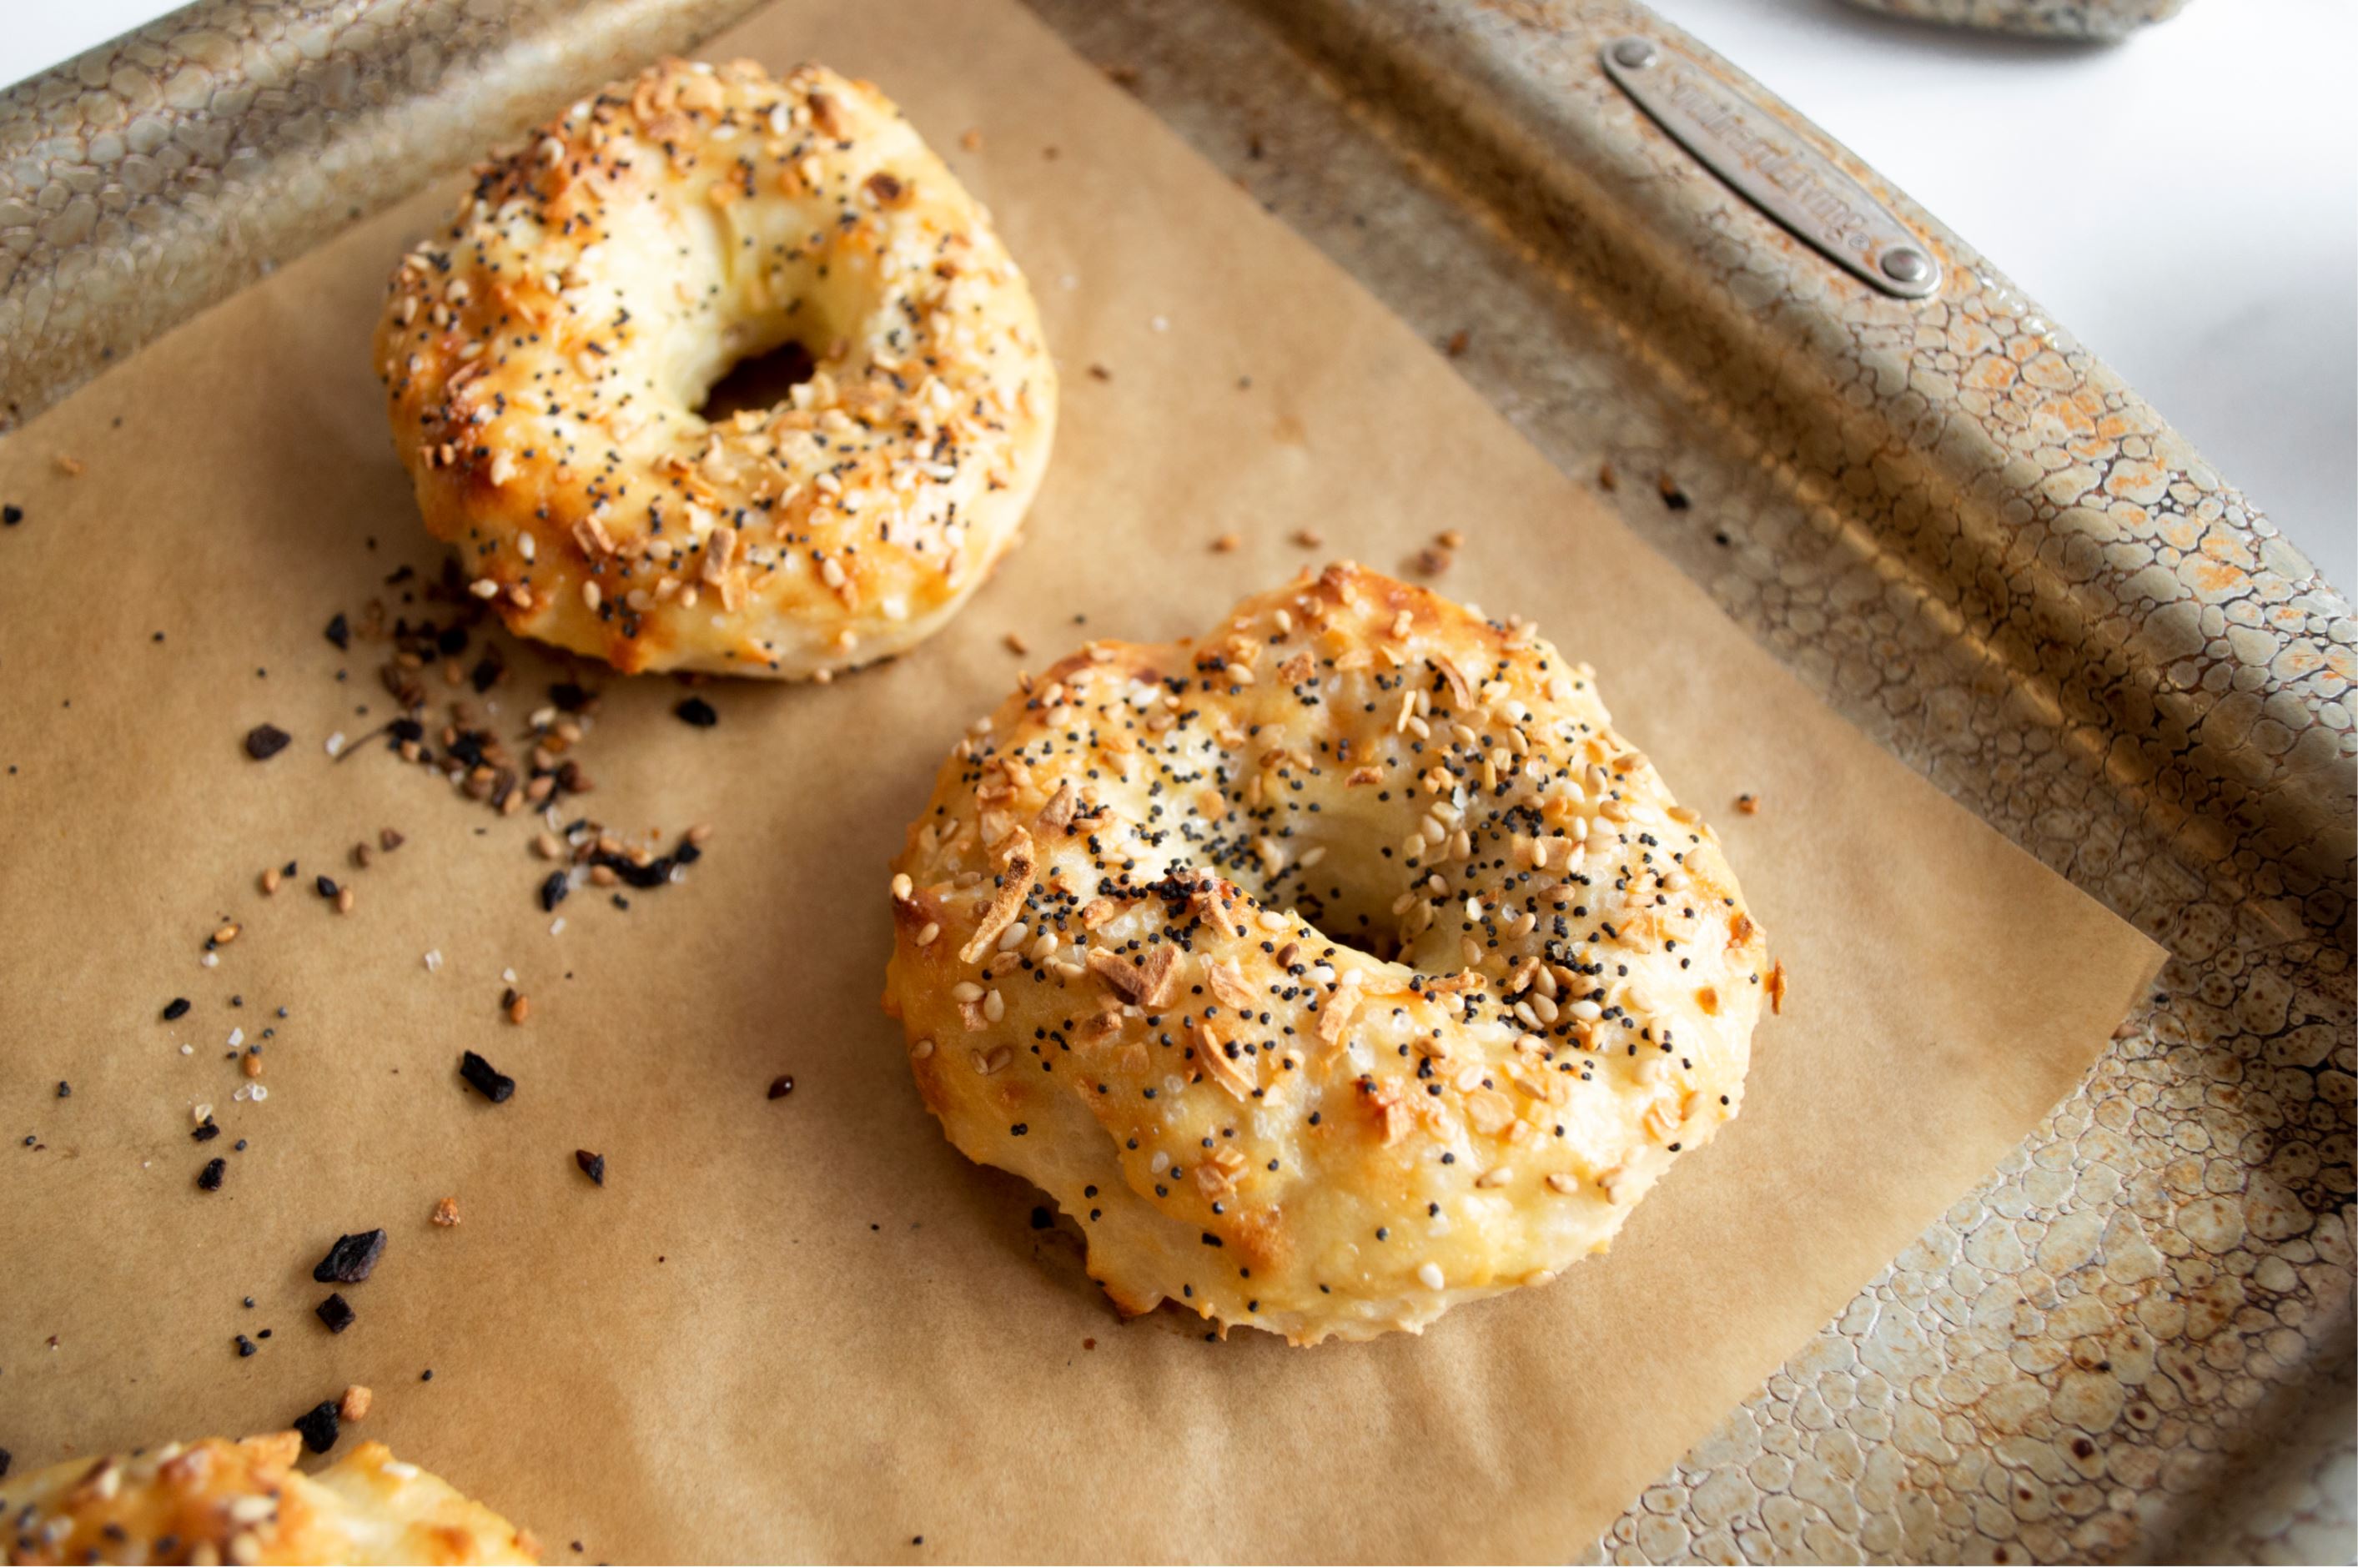 Two Greek Yogurt Everything Bagels sit on brown parchment paper on a metal pan. The parchment has pieces of everything bagel seasoning scattered on it.